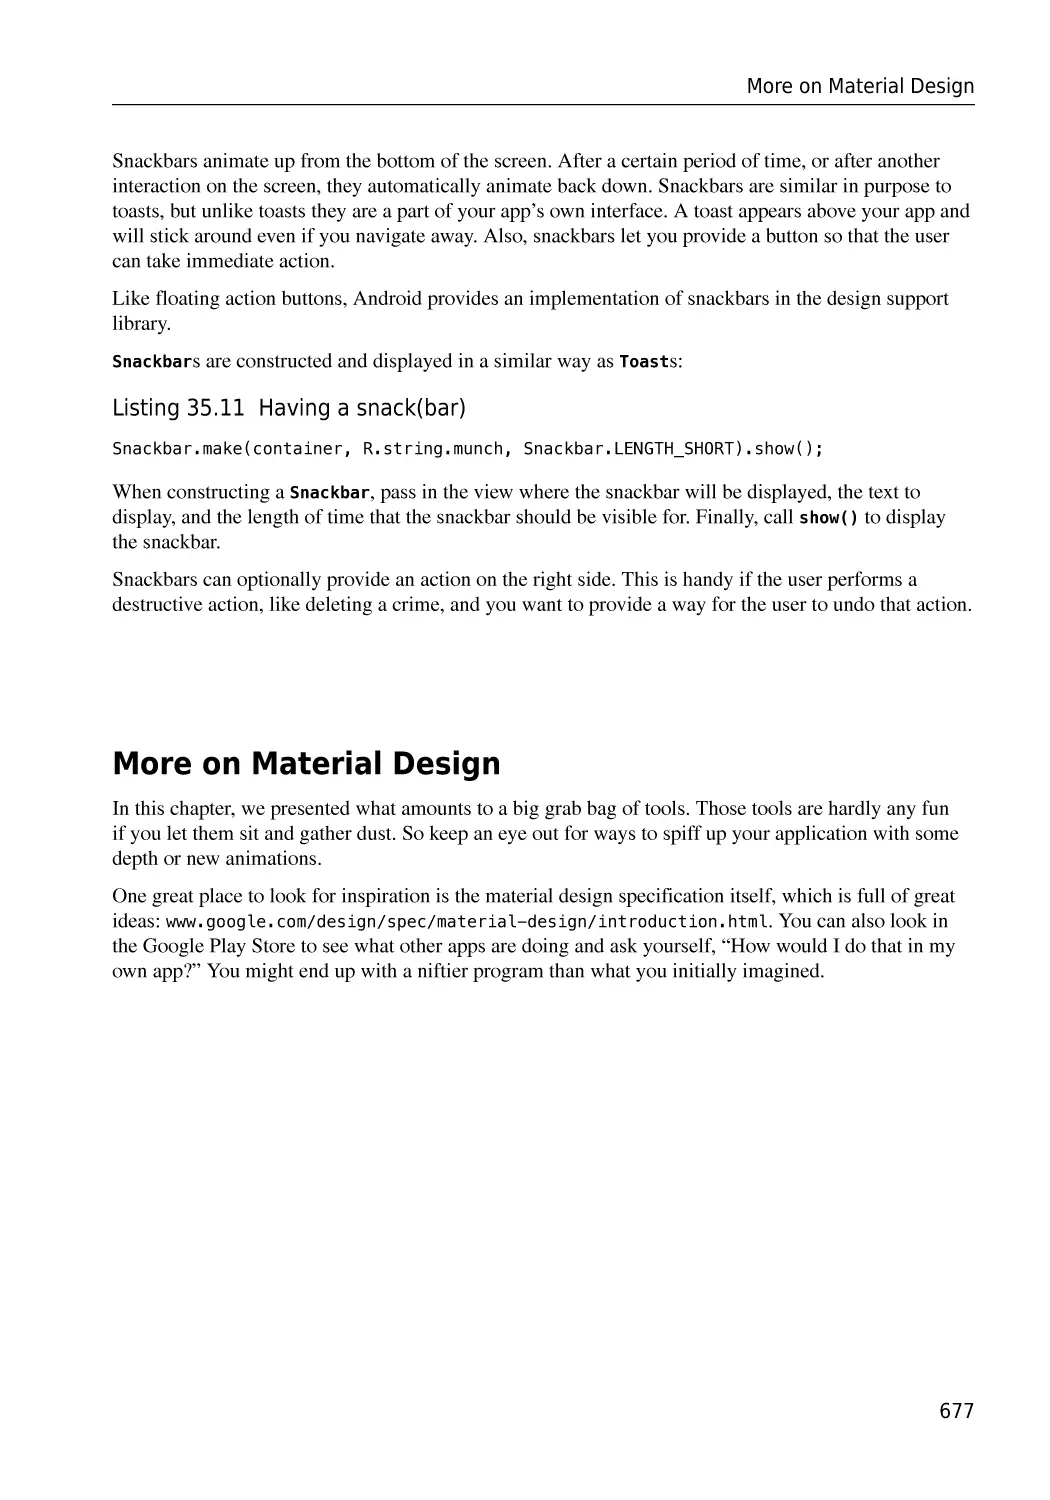 More on Material Design